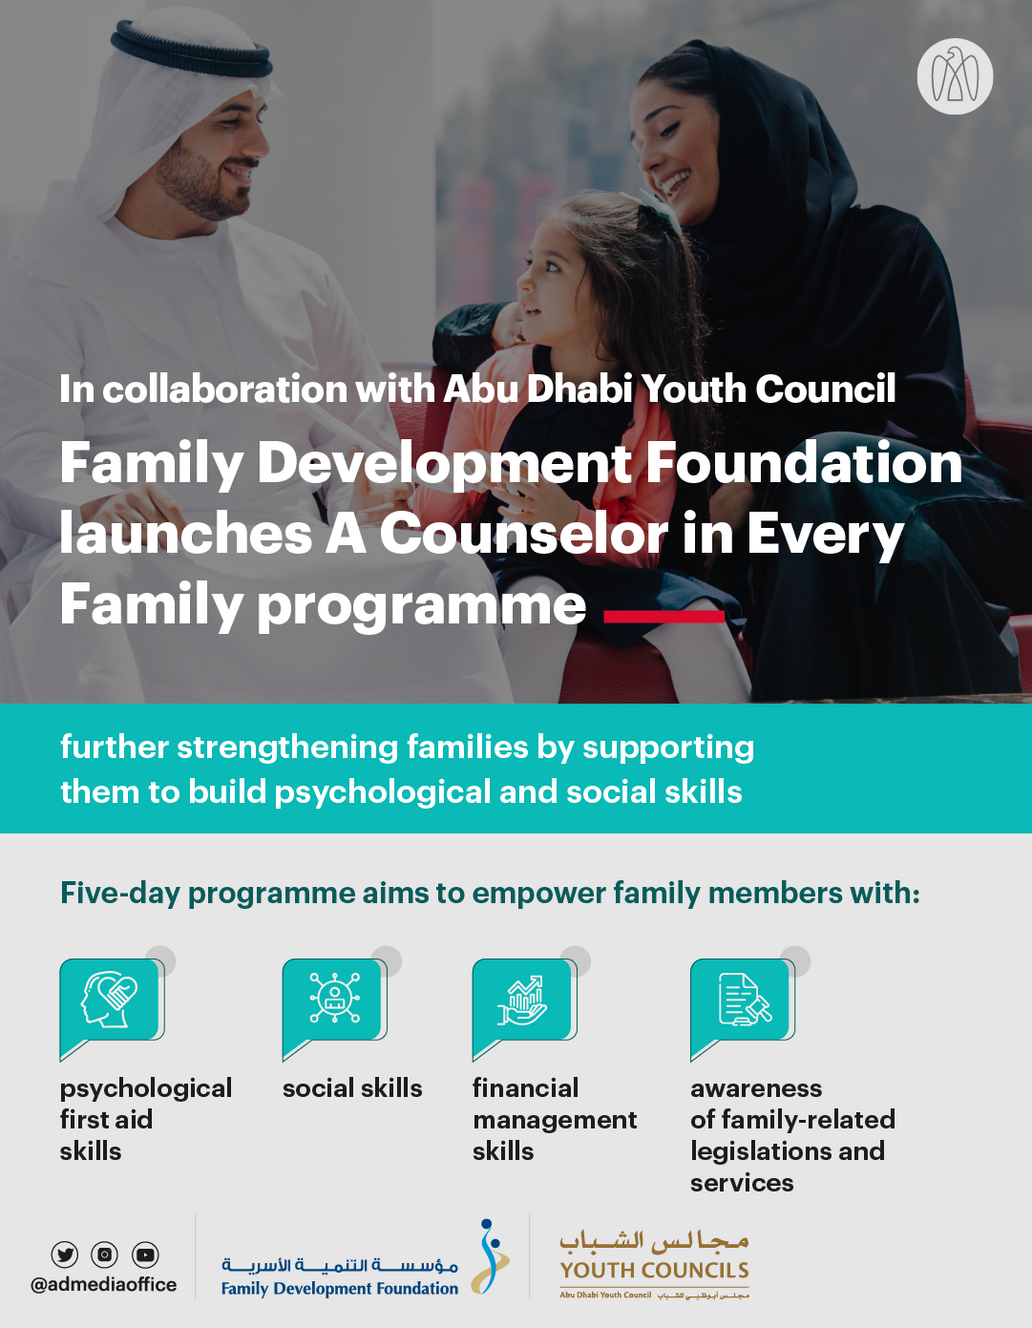 Family Development Foundation launches A Counselor in Every Family programme